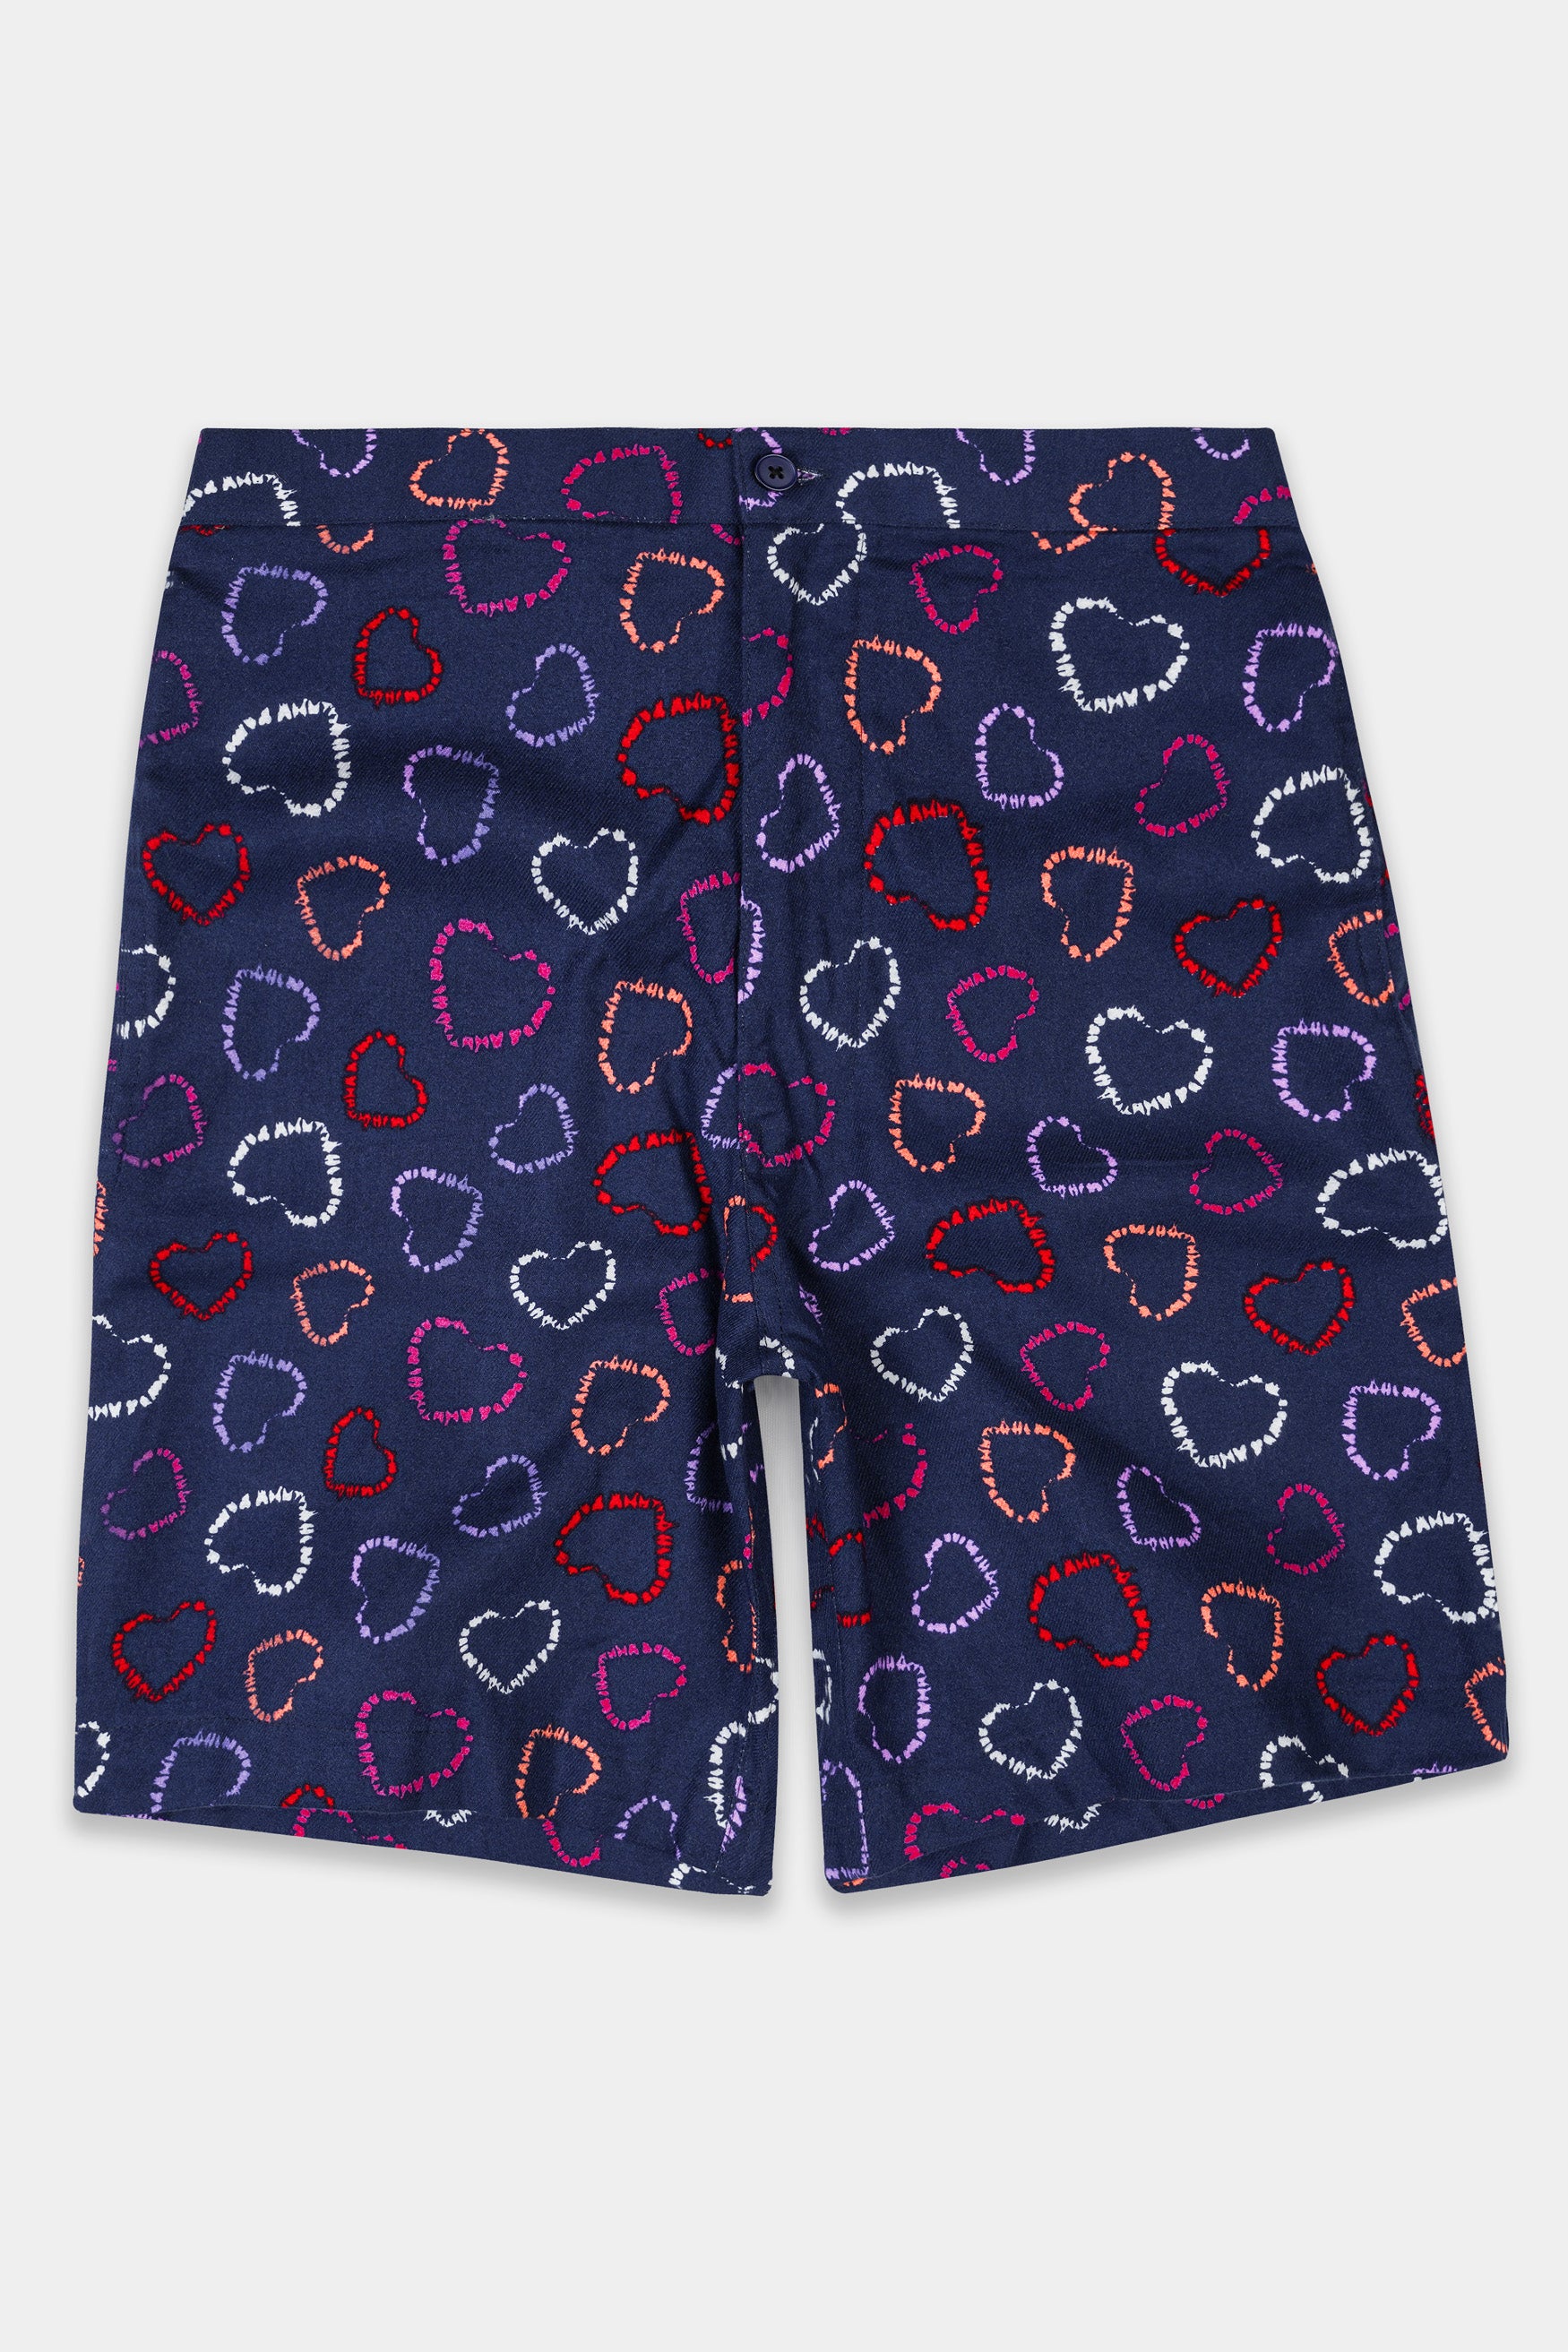 Admiral Blue with multicolor Hearts Printed Corduroy Shorts SR356-28, SR356-30, SR356-32, SR356-34, SR356-36, SR356-38, SR356-40, SR356-42, SR356-44